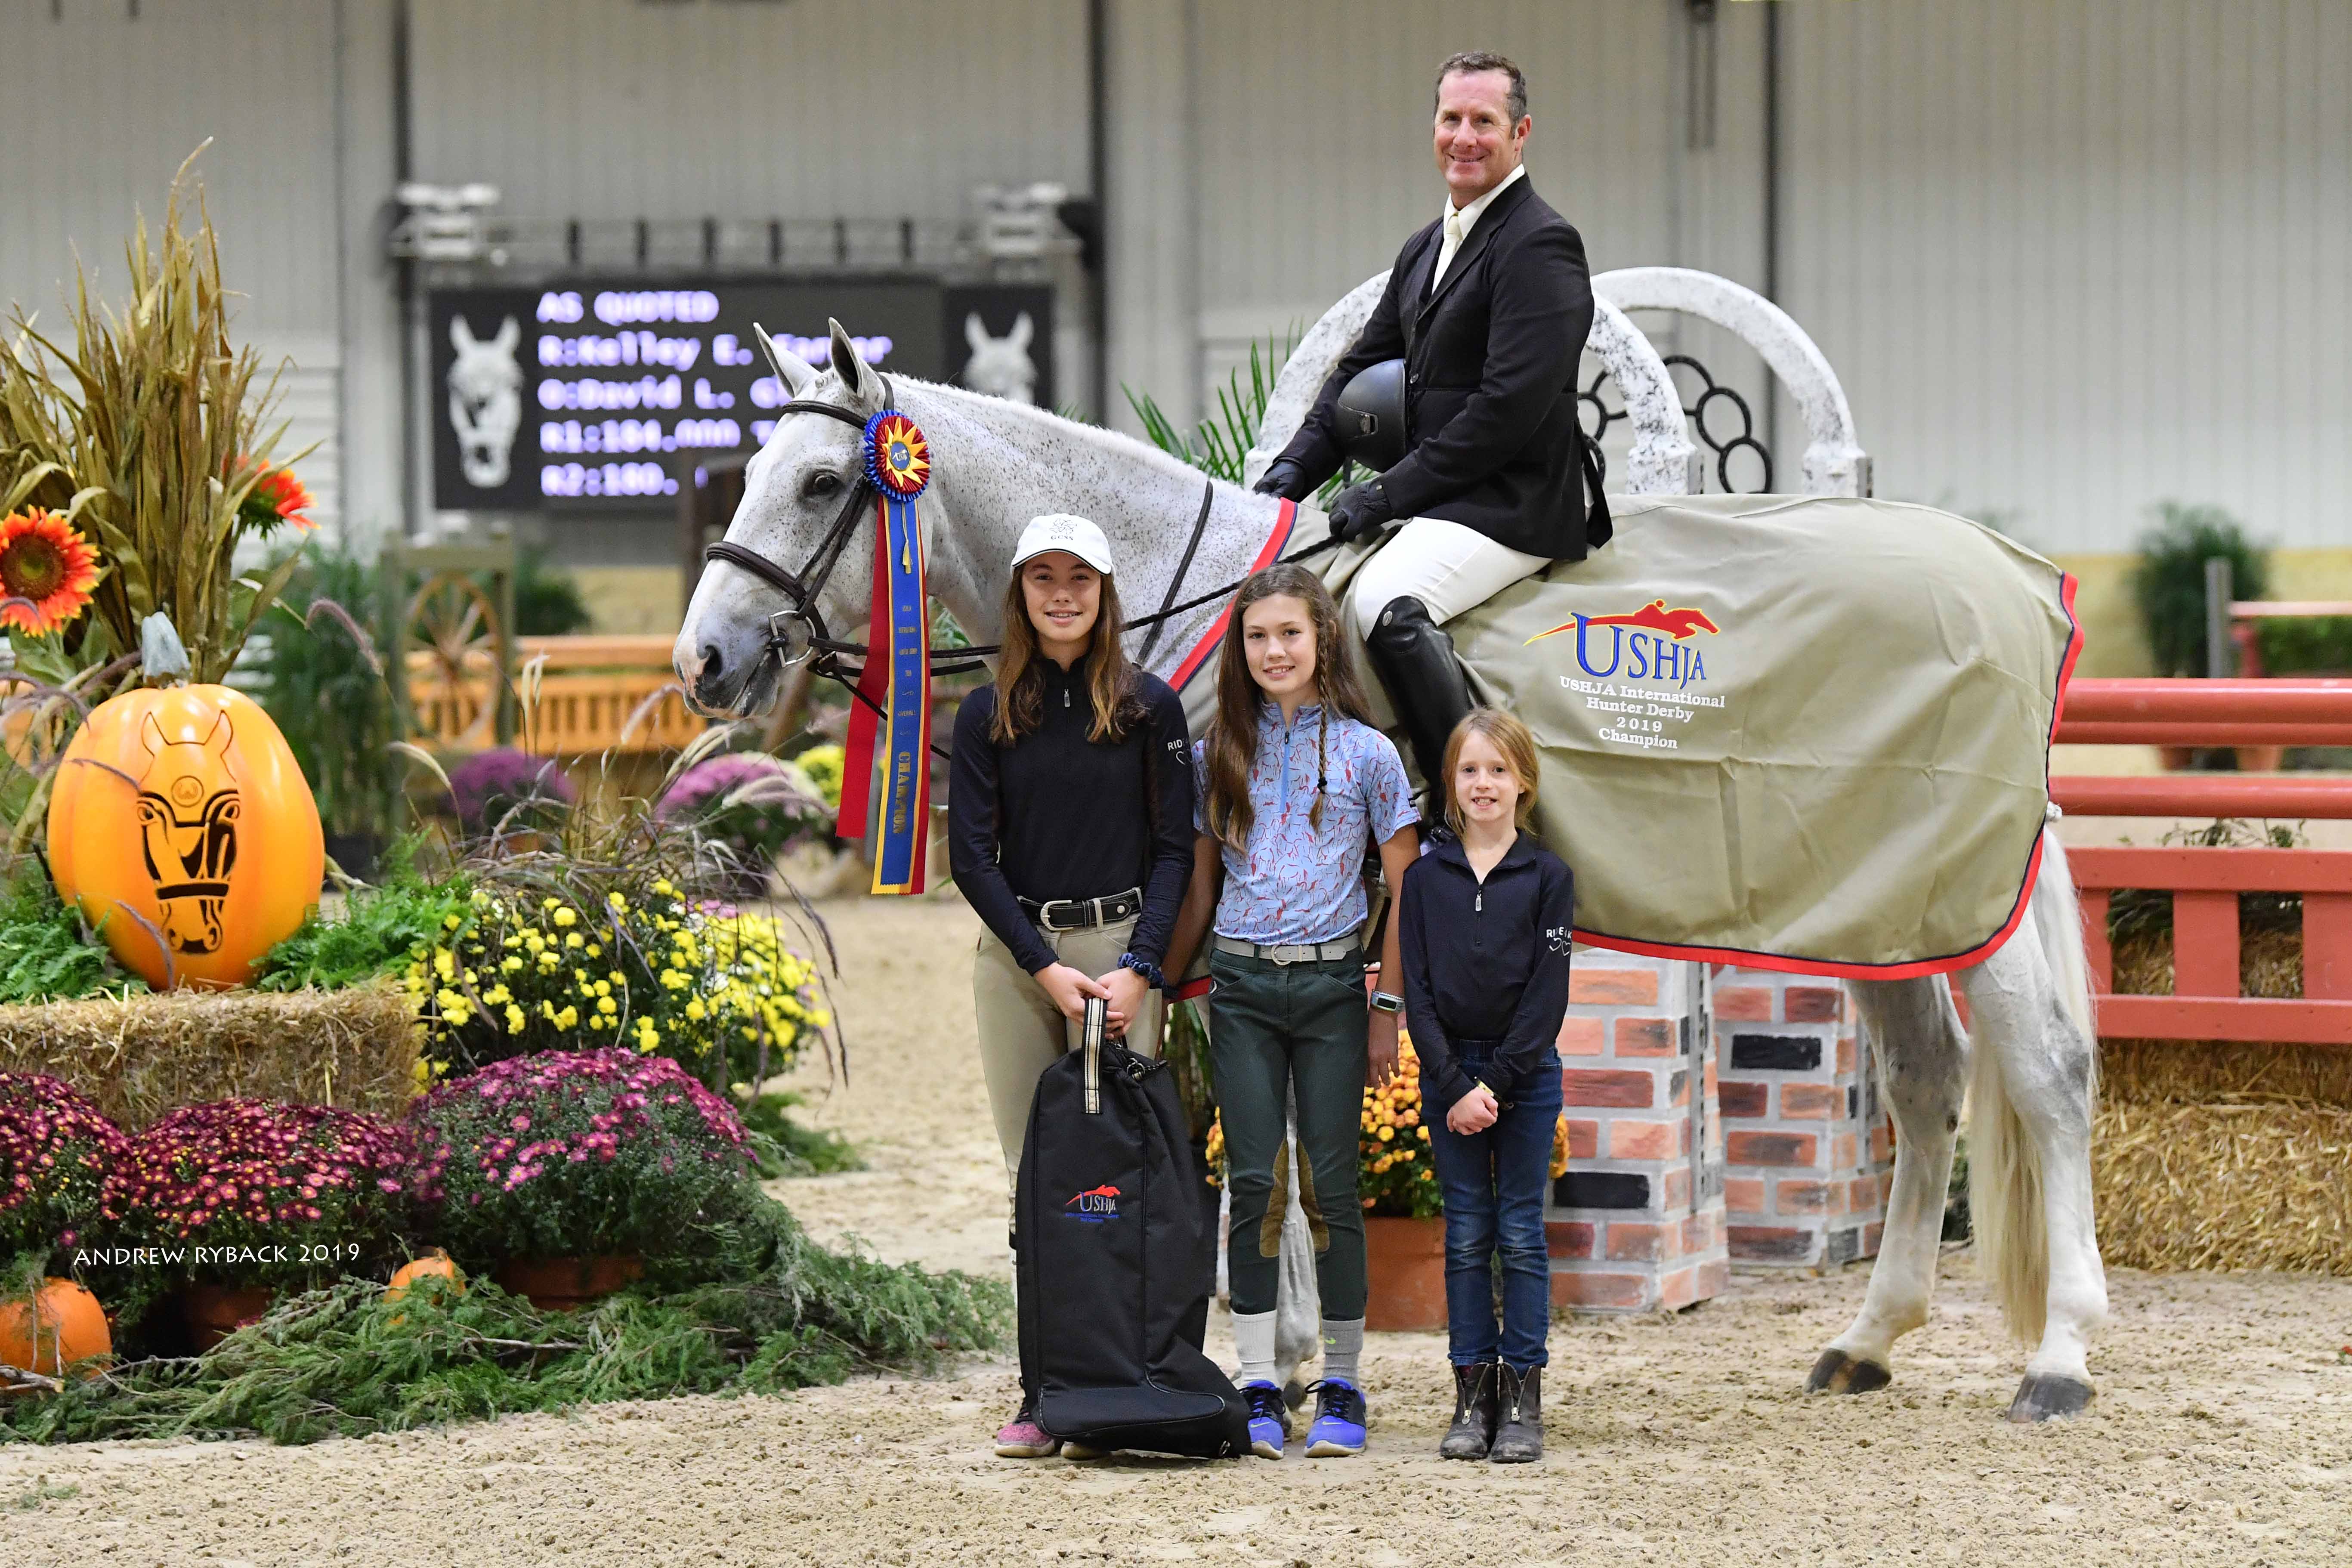 Z Center Corallo in USHJA Top the Equestrian International and Derby Greg $40,000 - Crolick Honors Take World Hunter